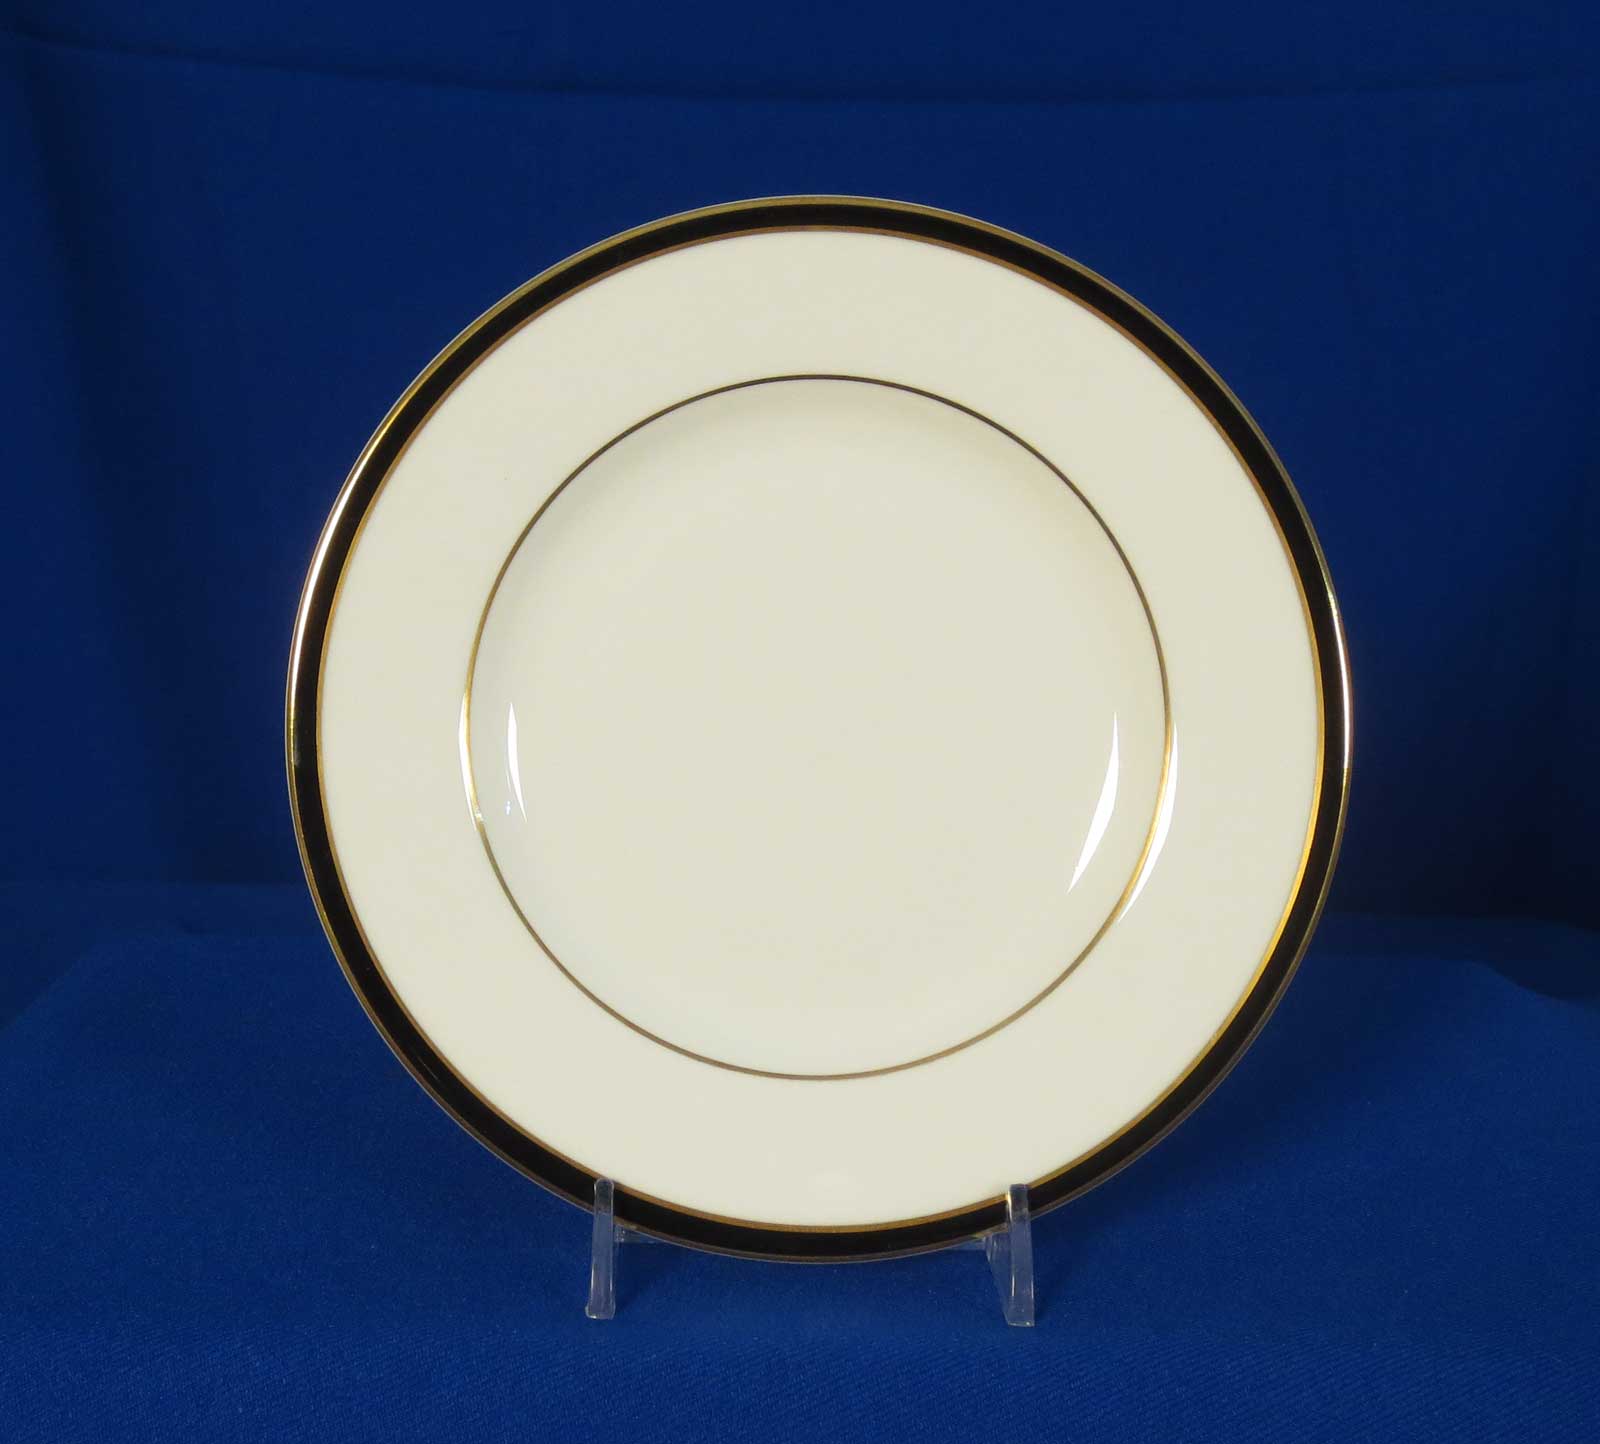 Minton Saturn Black Bread and Butter Plate Black Band Gold Trim Bone China England